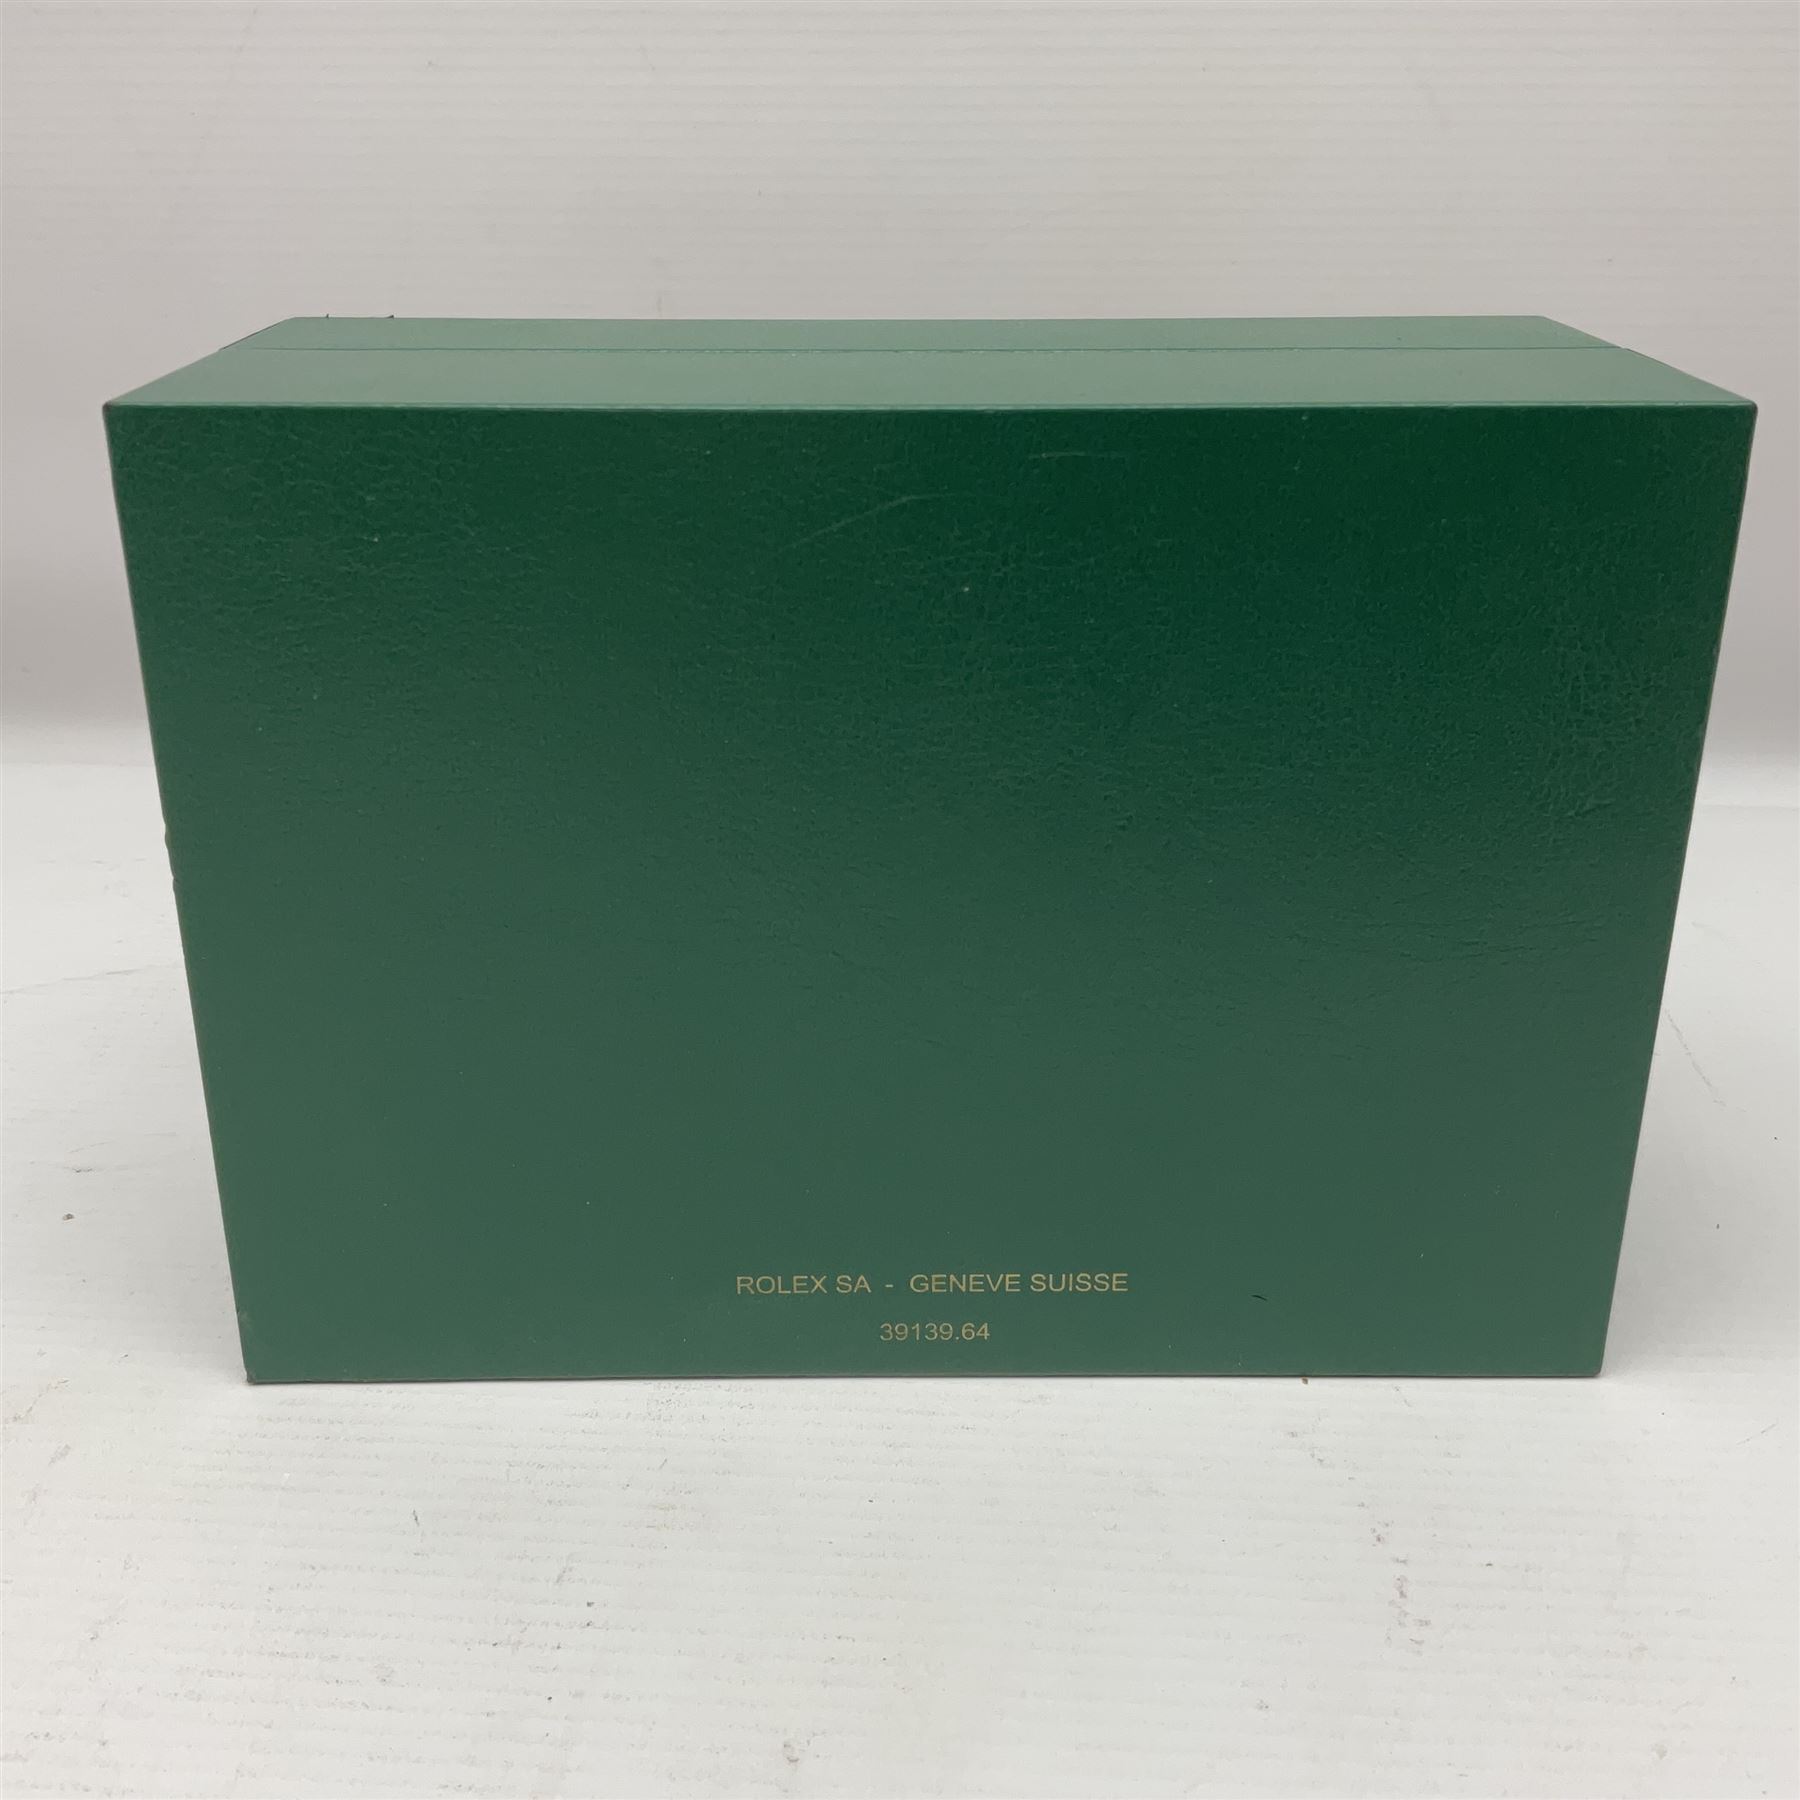 Rolex green leather box - Image 6 of 6